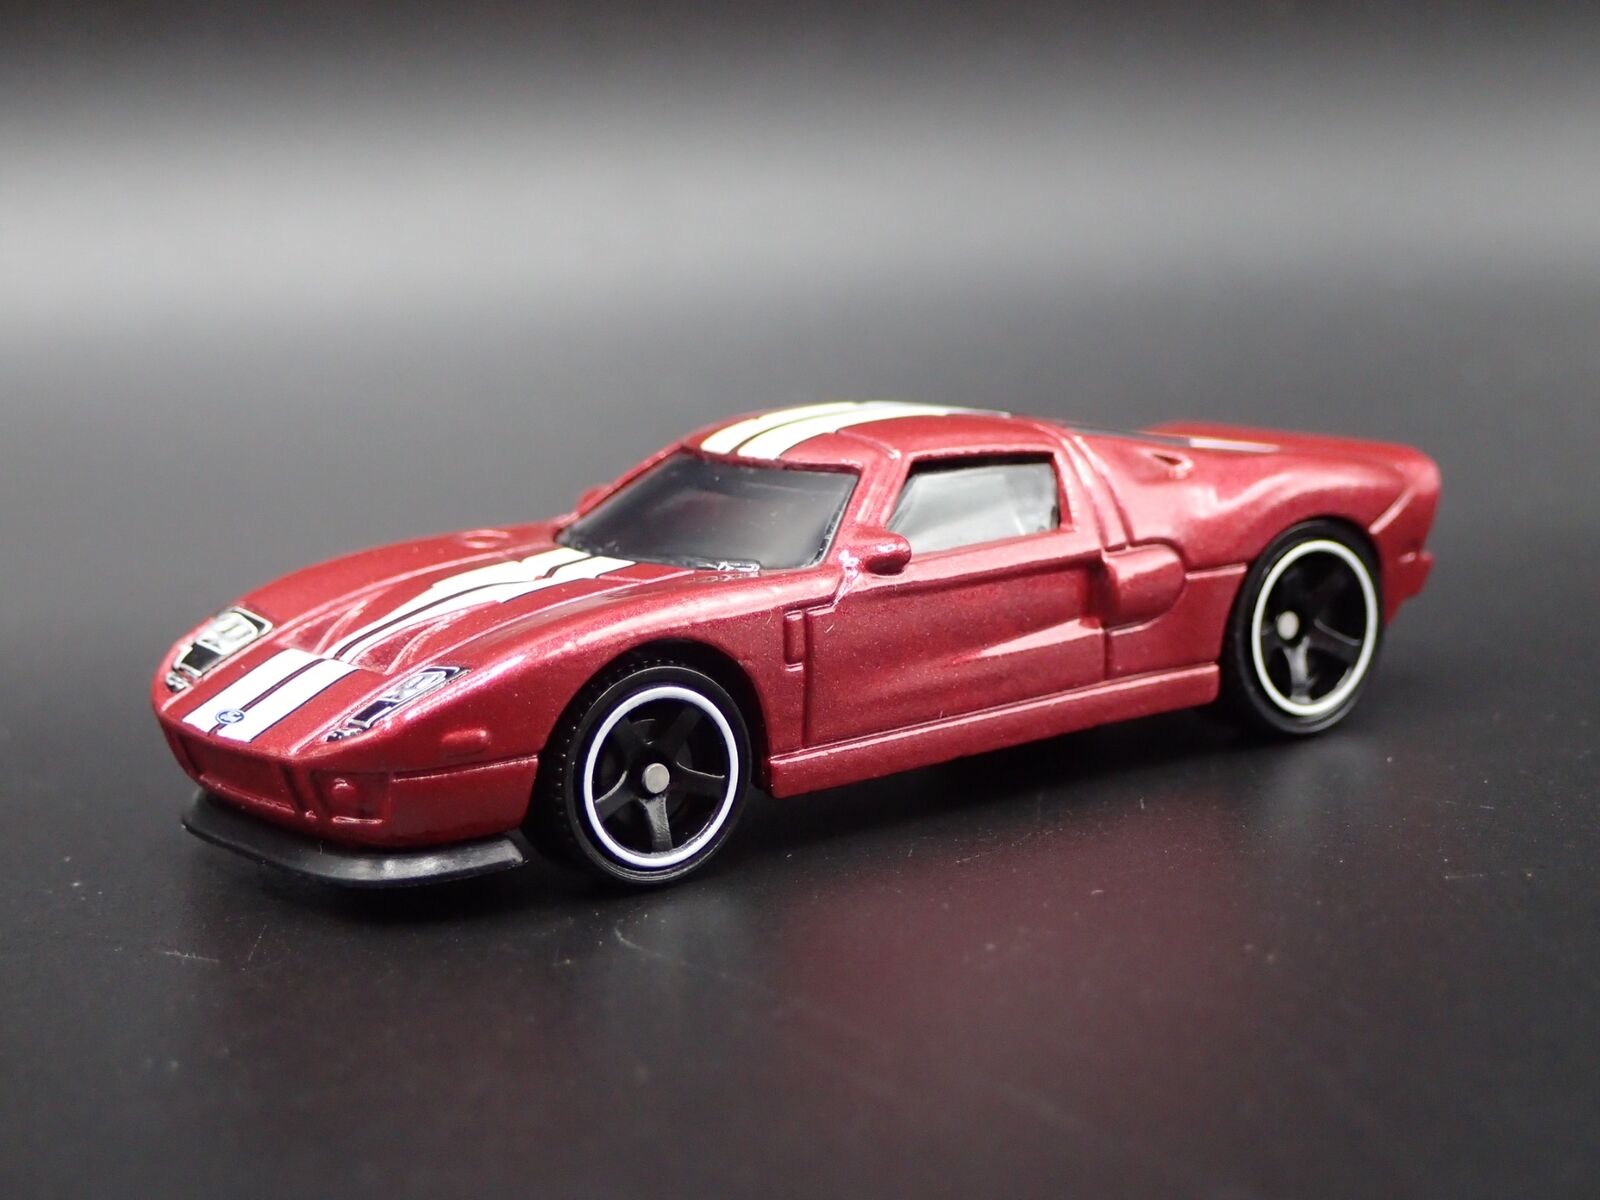 2005-2006 FORD GT SUPERCAR RARE 1:64 SCALE COLLECTIBLE DIORAMA DIECAST MODEL CAR